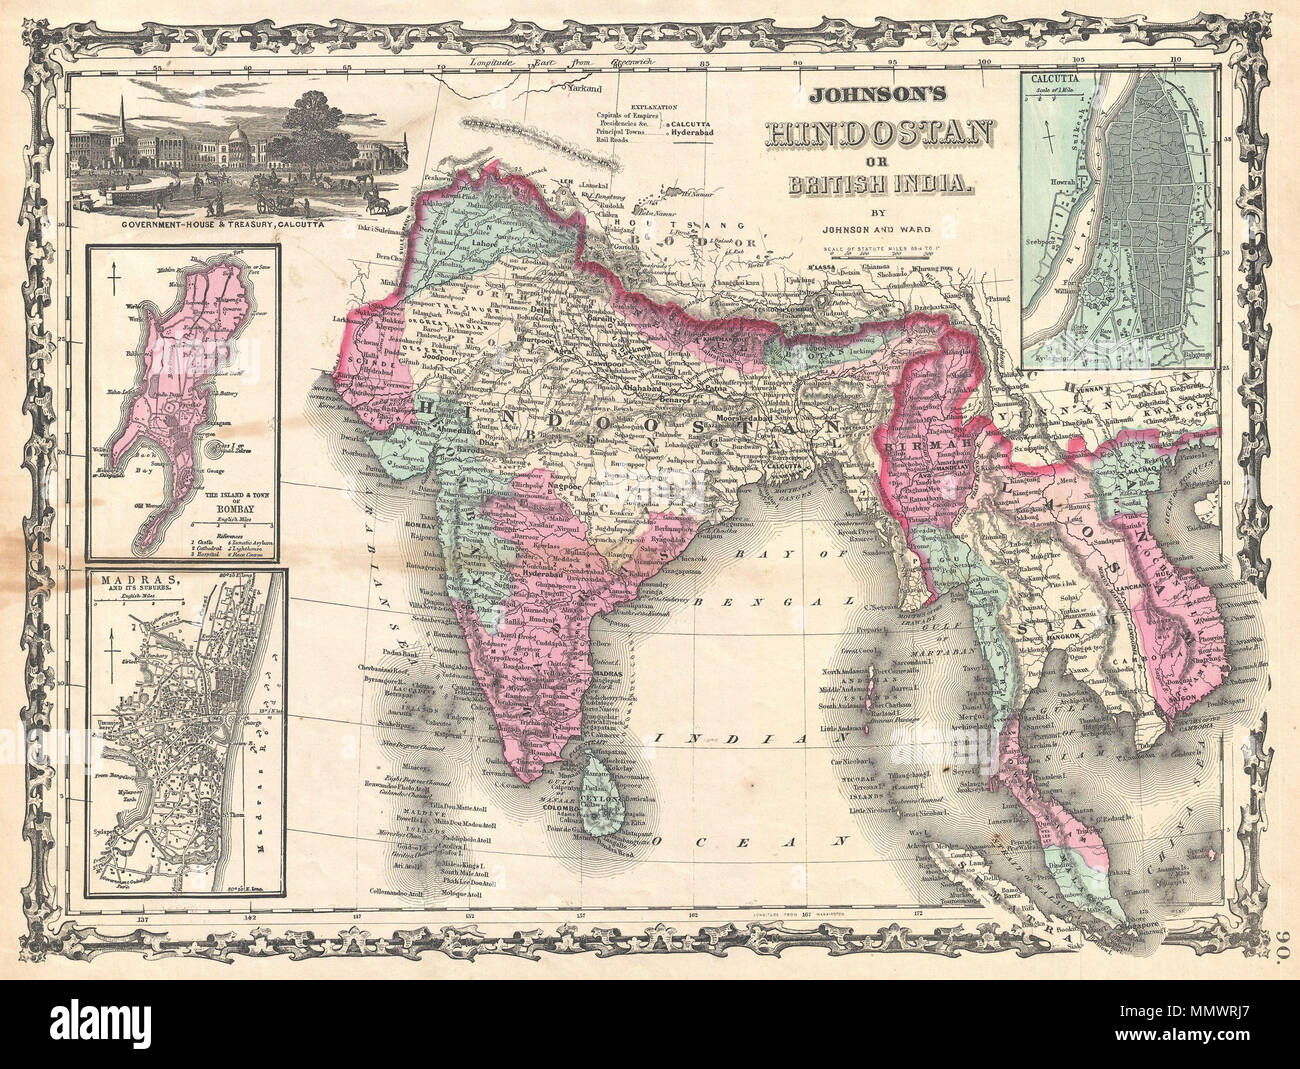 .  English: A very nice example of A. J. Johnson’s 1862 map of India and Southeast Asia. Covers from the Mouths of the Indus River eastward to include all of India, Burma, Siam (Thailand), Laos, Cambodia, Malaysia (Malacca) and Vietnam (Tonquin and Chochin). Also includes parts of Nepal, China, Bhutan, Sumatra and Ceylon (Sri Lanka). Offers color coding according to country and region as well as notations regarding roadways, cities, towns, and river systems. Three inset maps focus on the Island of Bombay (Mumbai), Madras, and Calcutta. An view of the Government House and Treasury in Calcutta a Stock Photo